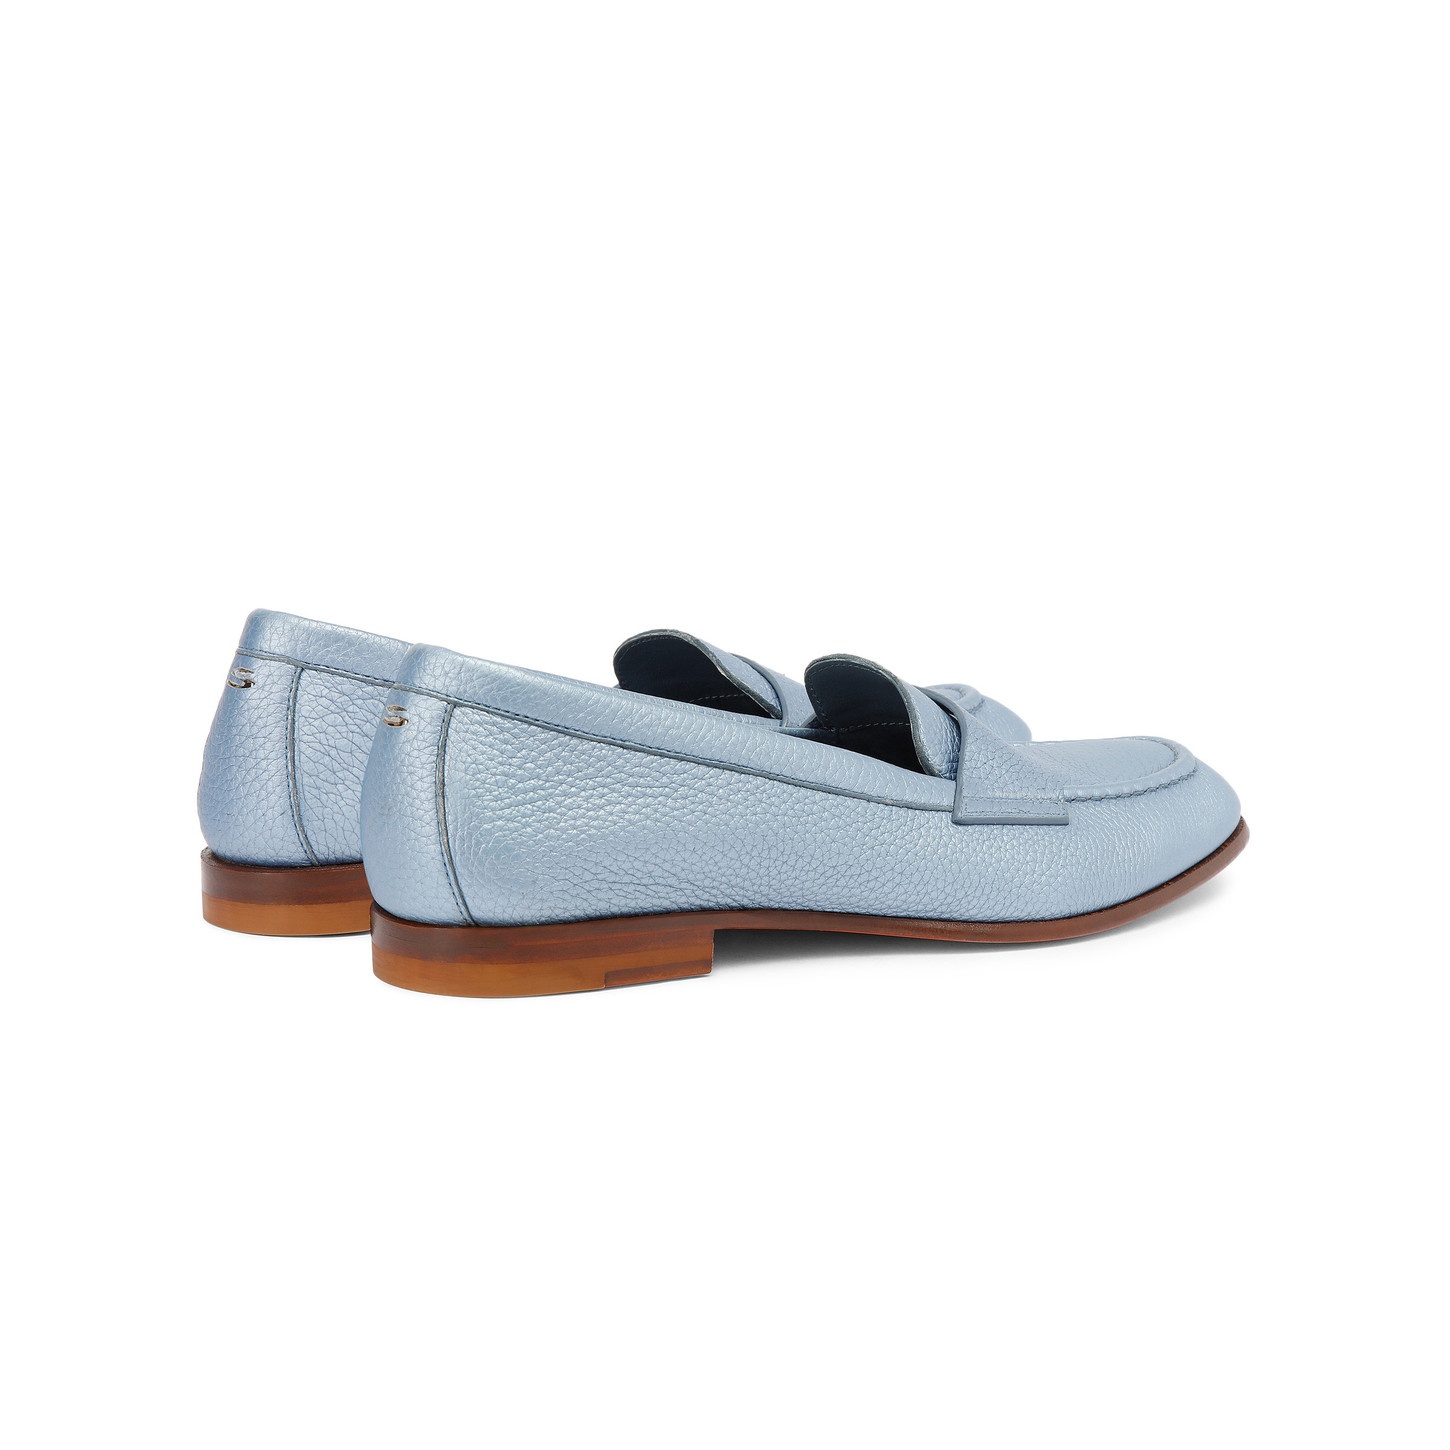 Women's light blue tumbled leather penny loafer - 4